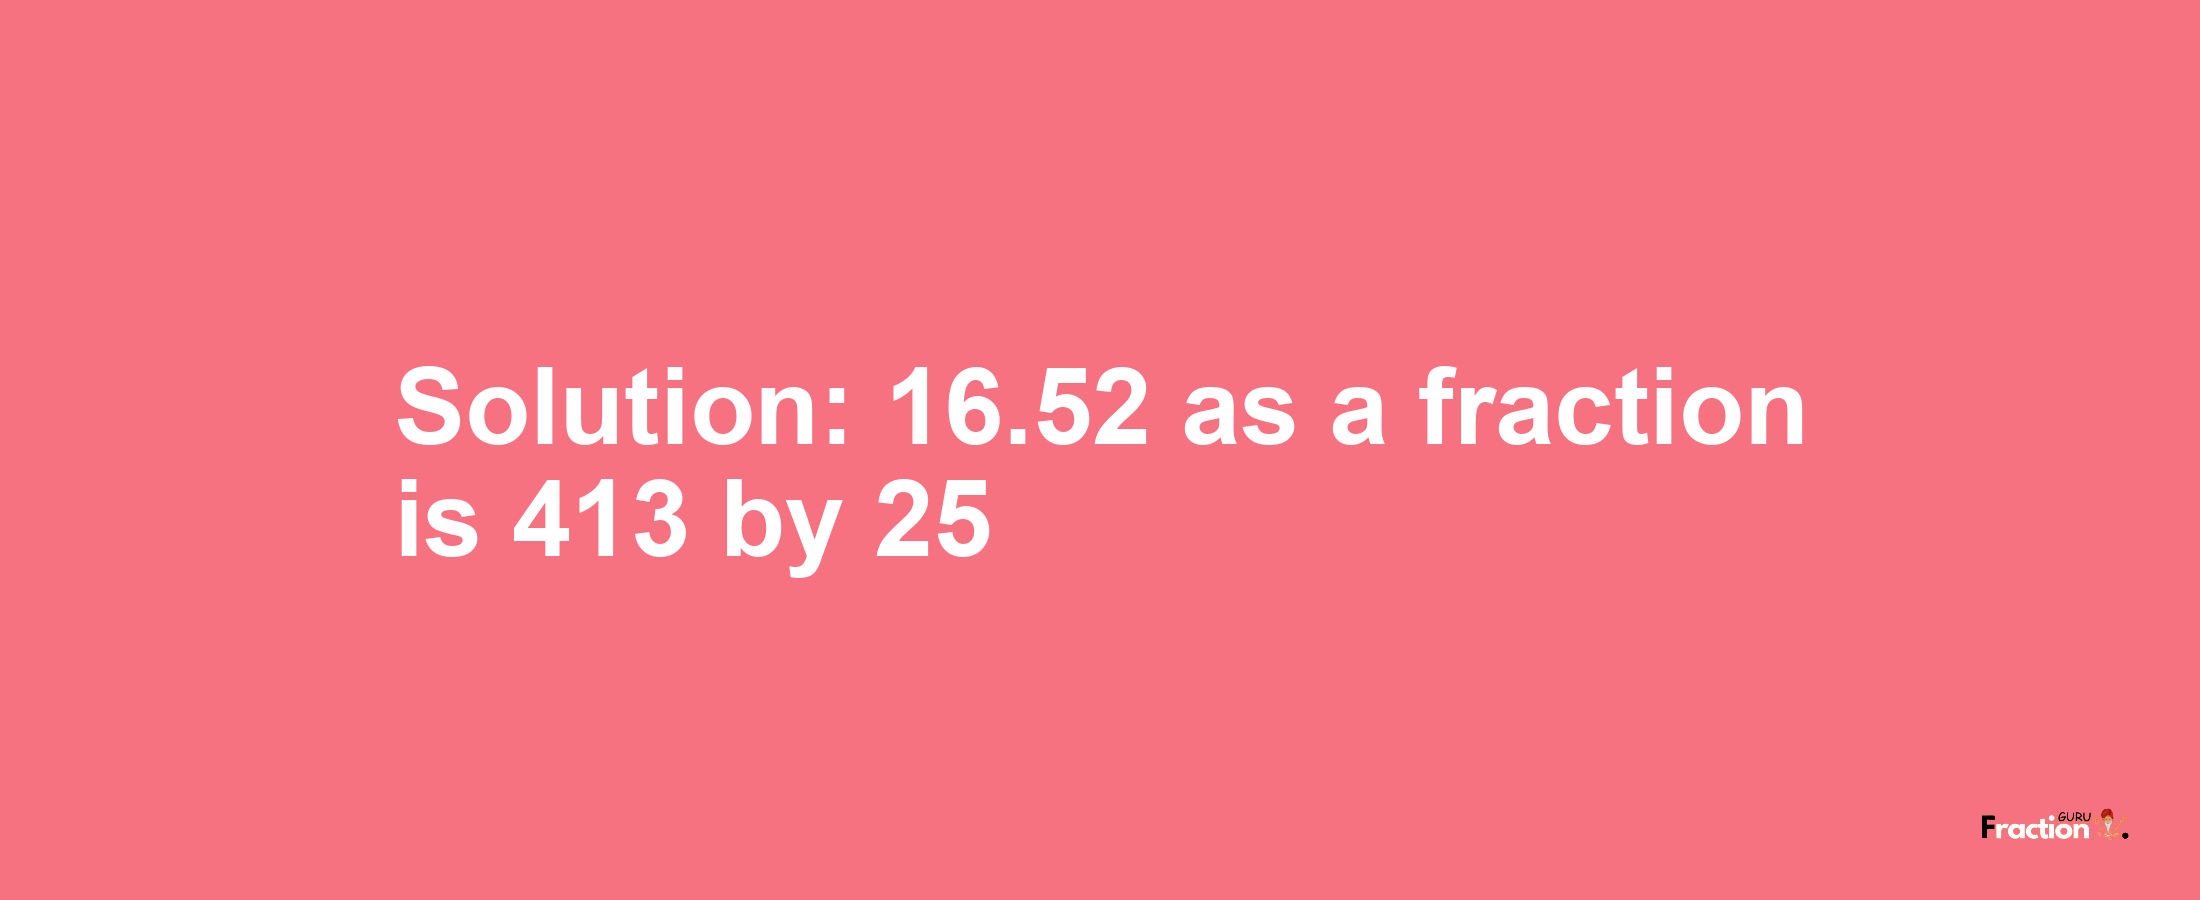 Solution:16.52 as a fraction is 413/25